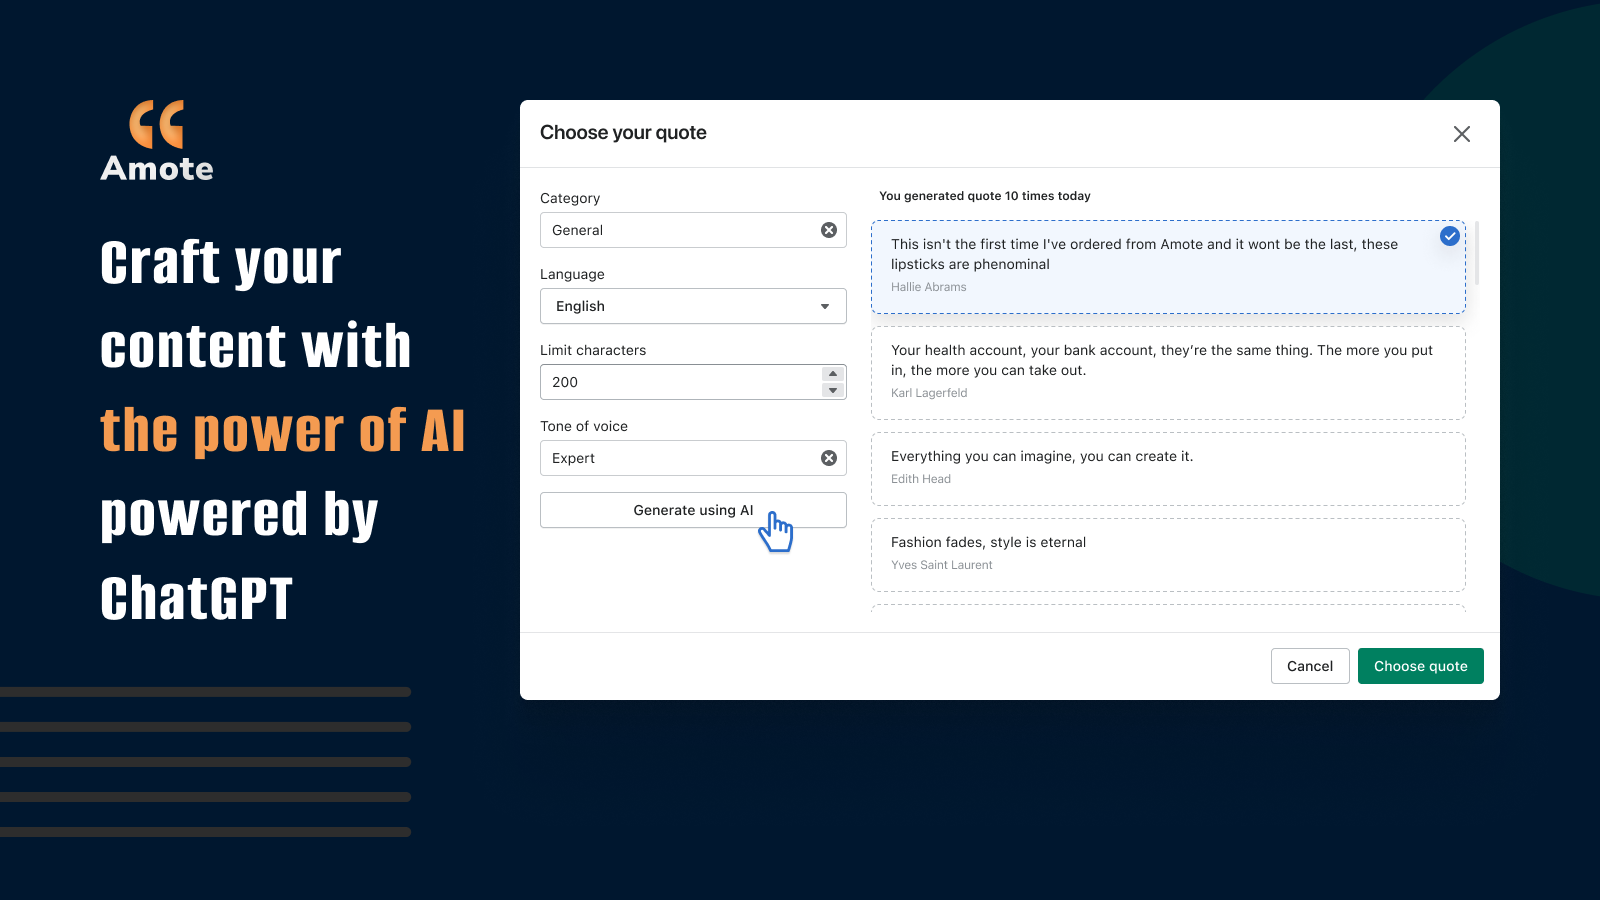 Craft your quote with the power of AI powered by ChatGPT